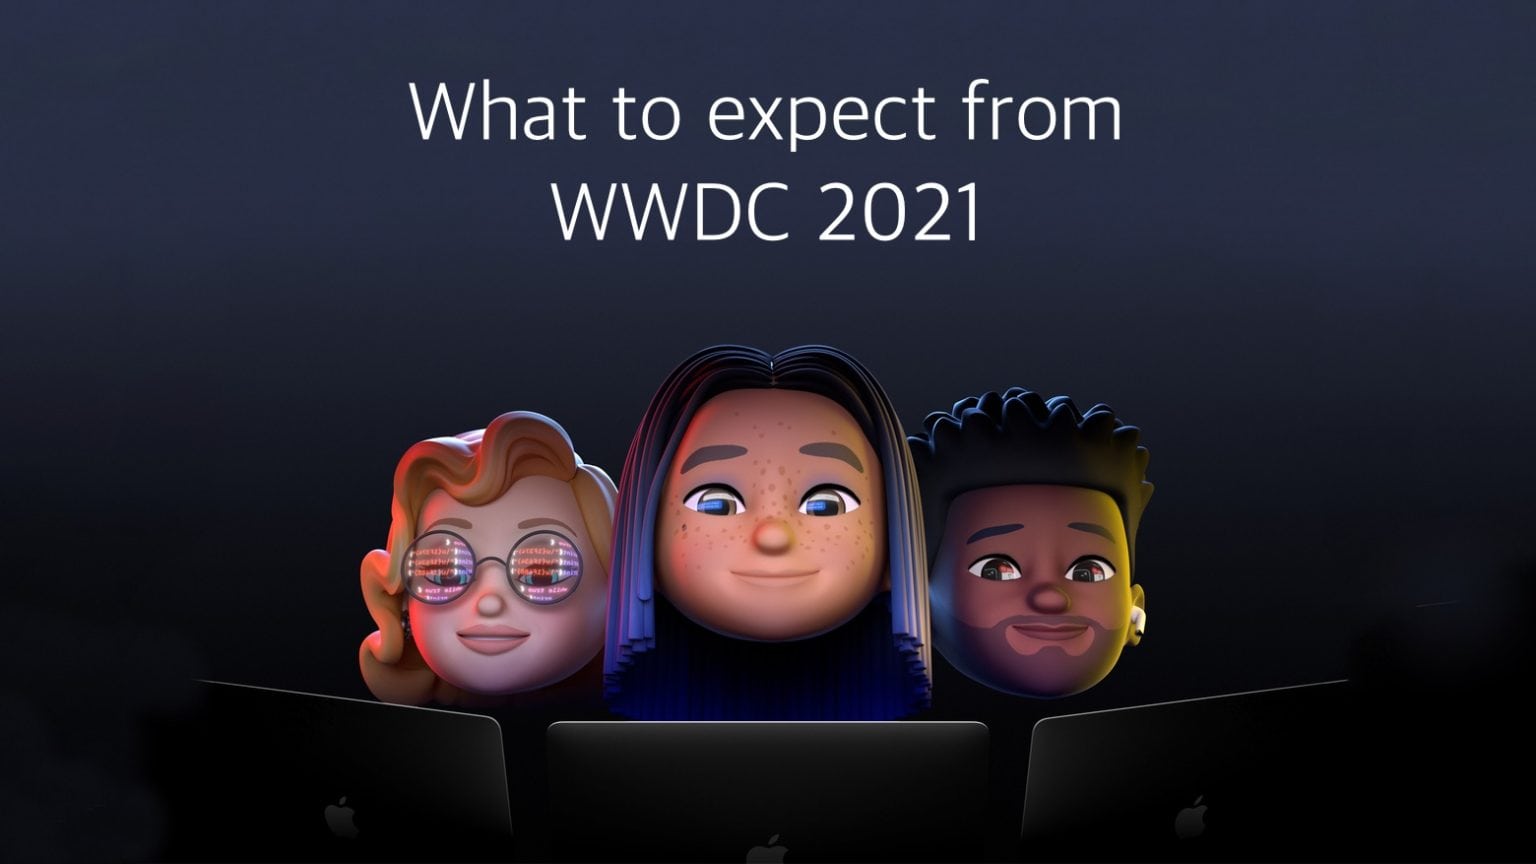 What to expect at WWDC 2021: iOS 15, macOS 12, new MacBook models, and more.